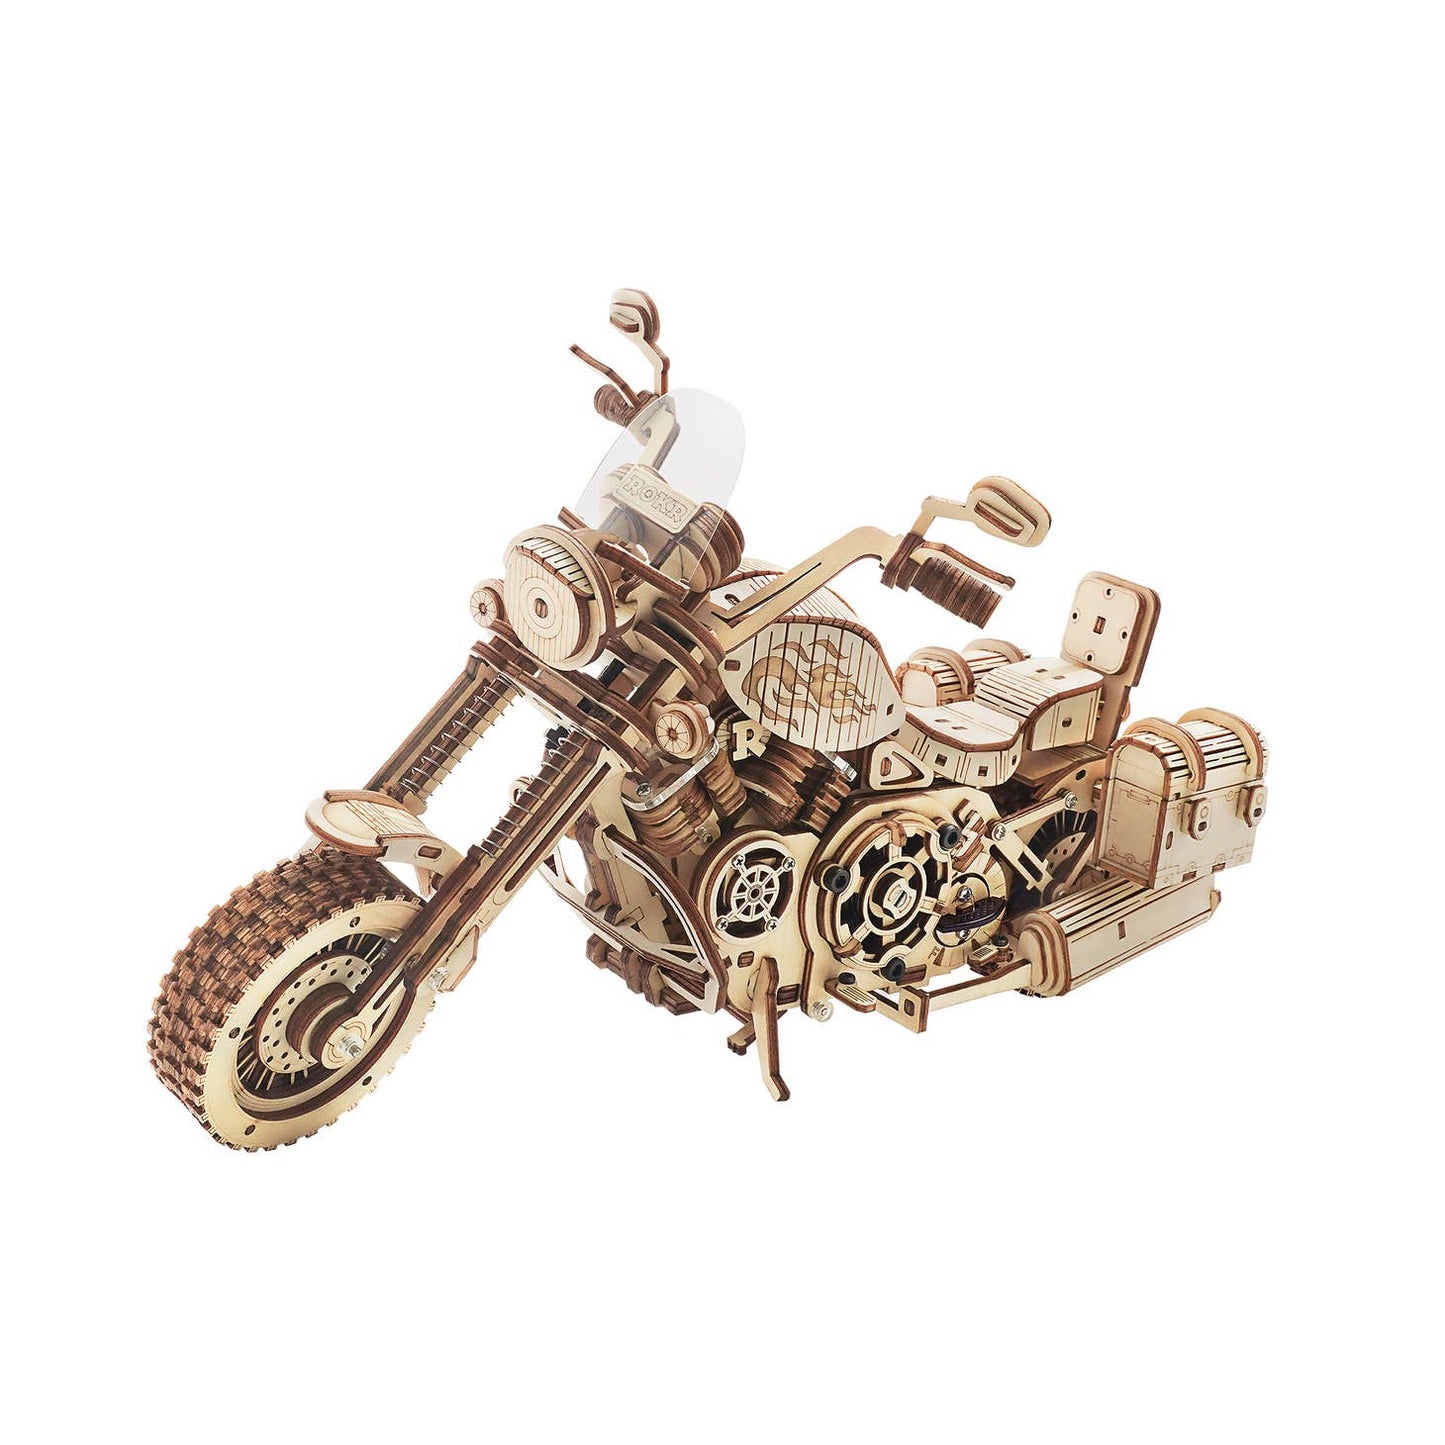 Cruiser Motorcycle Puzzle